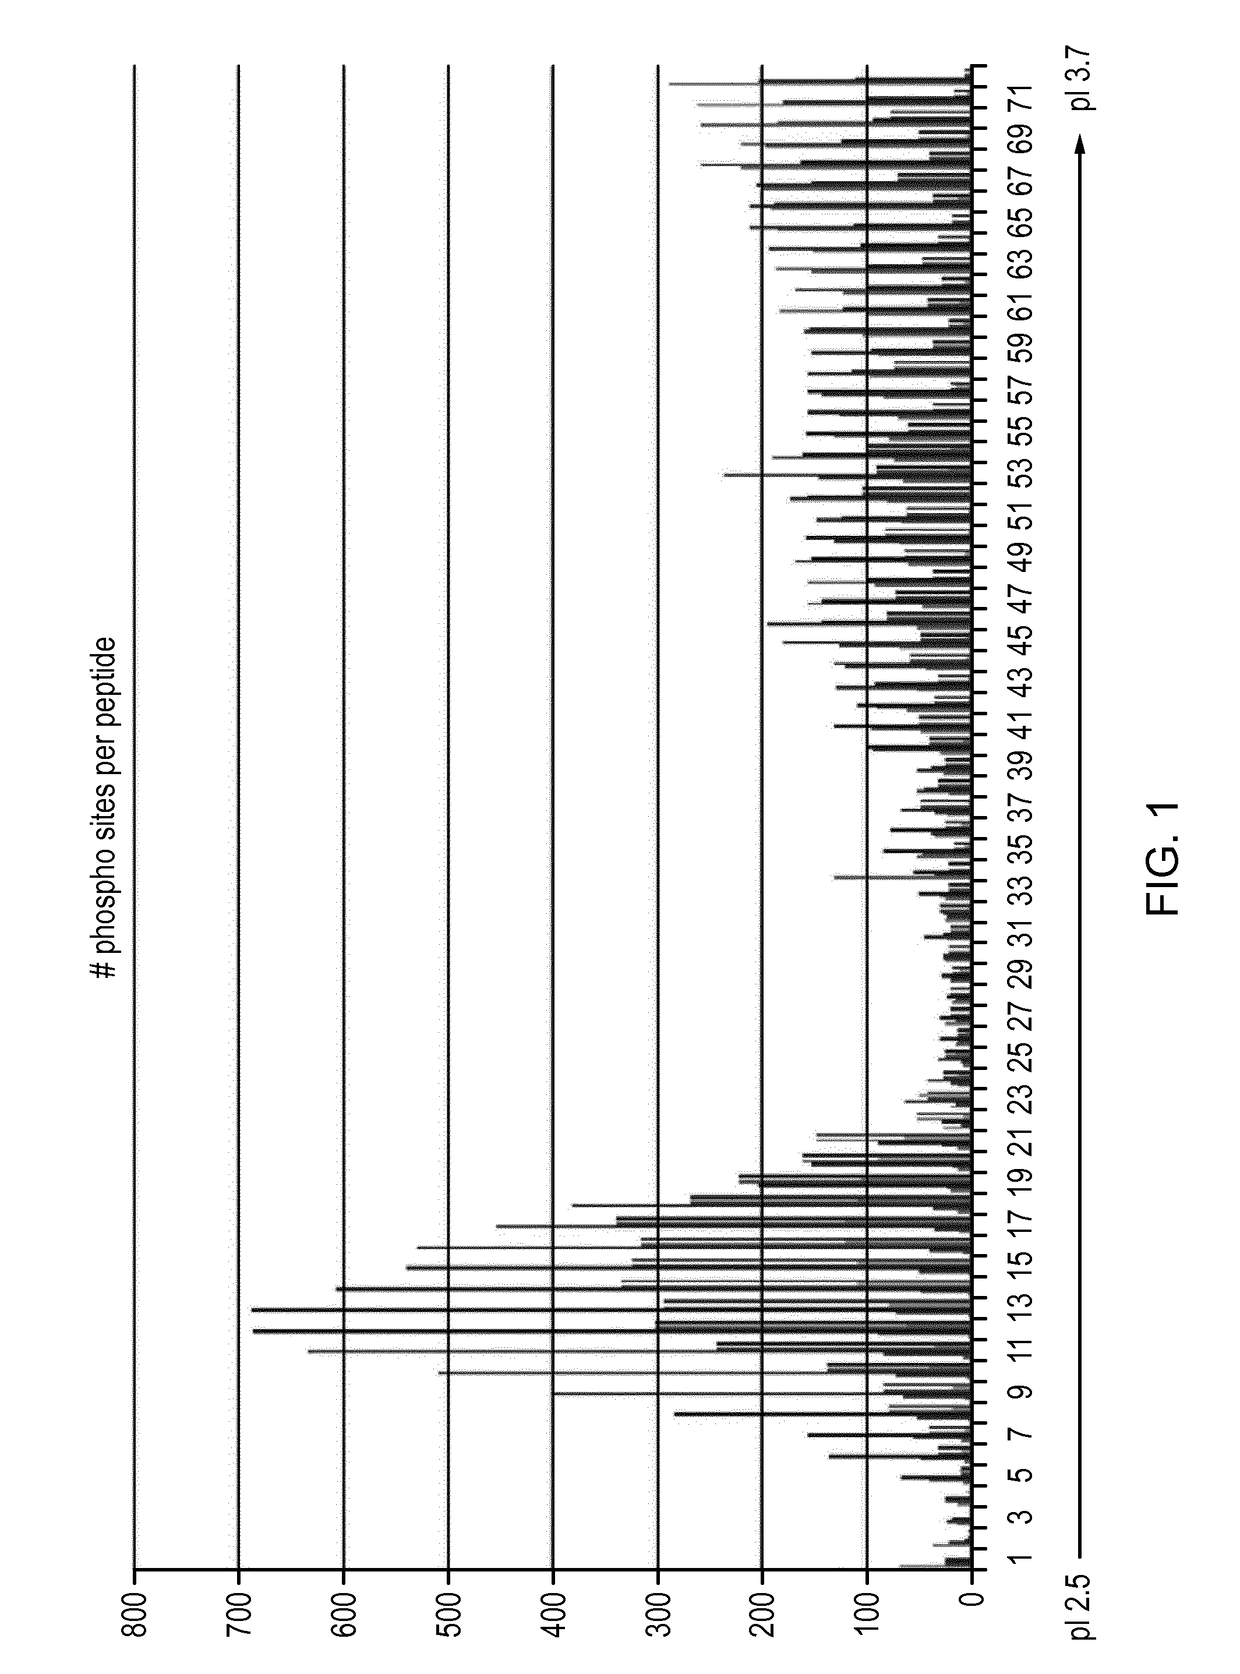 Method for Analyzing Posttranslational Modifications Using GEL IEF and Mass Spectrometry